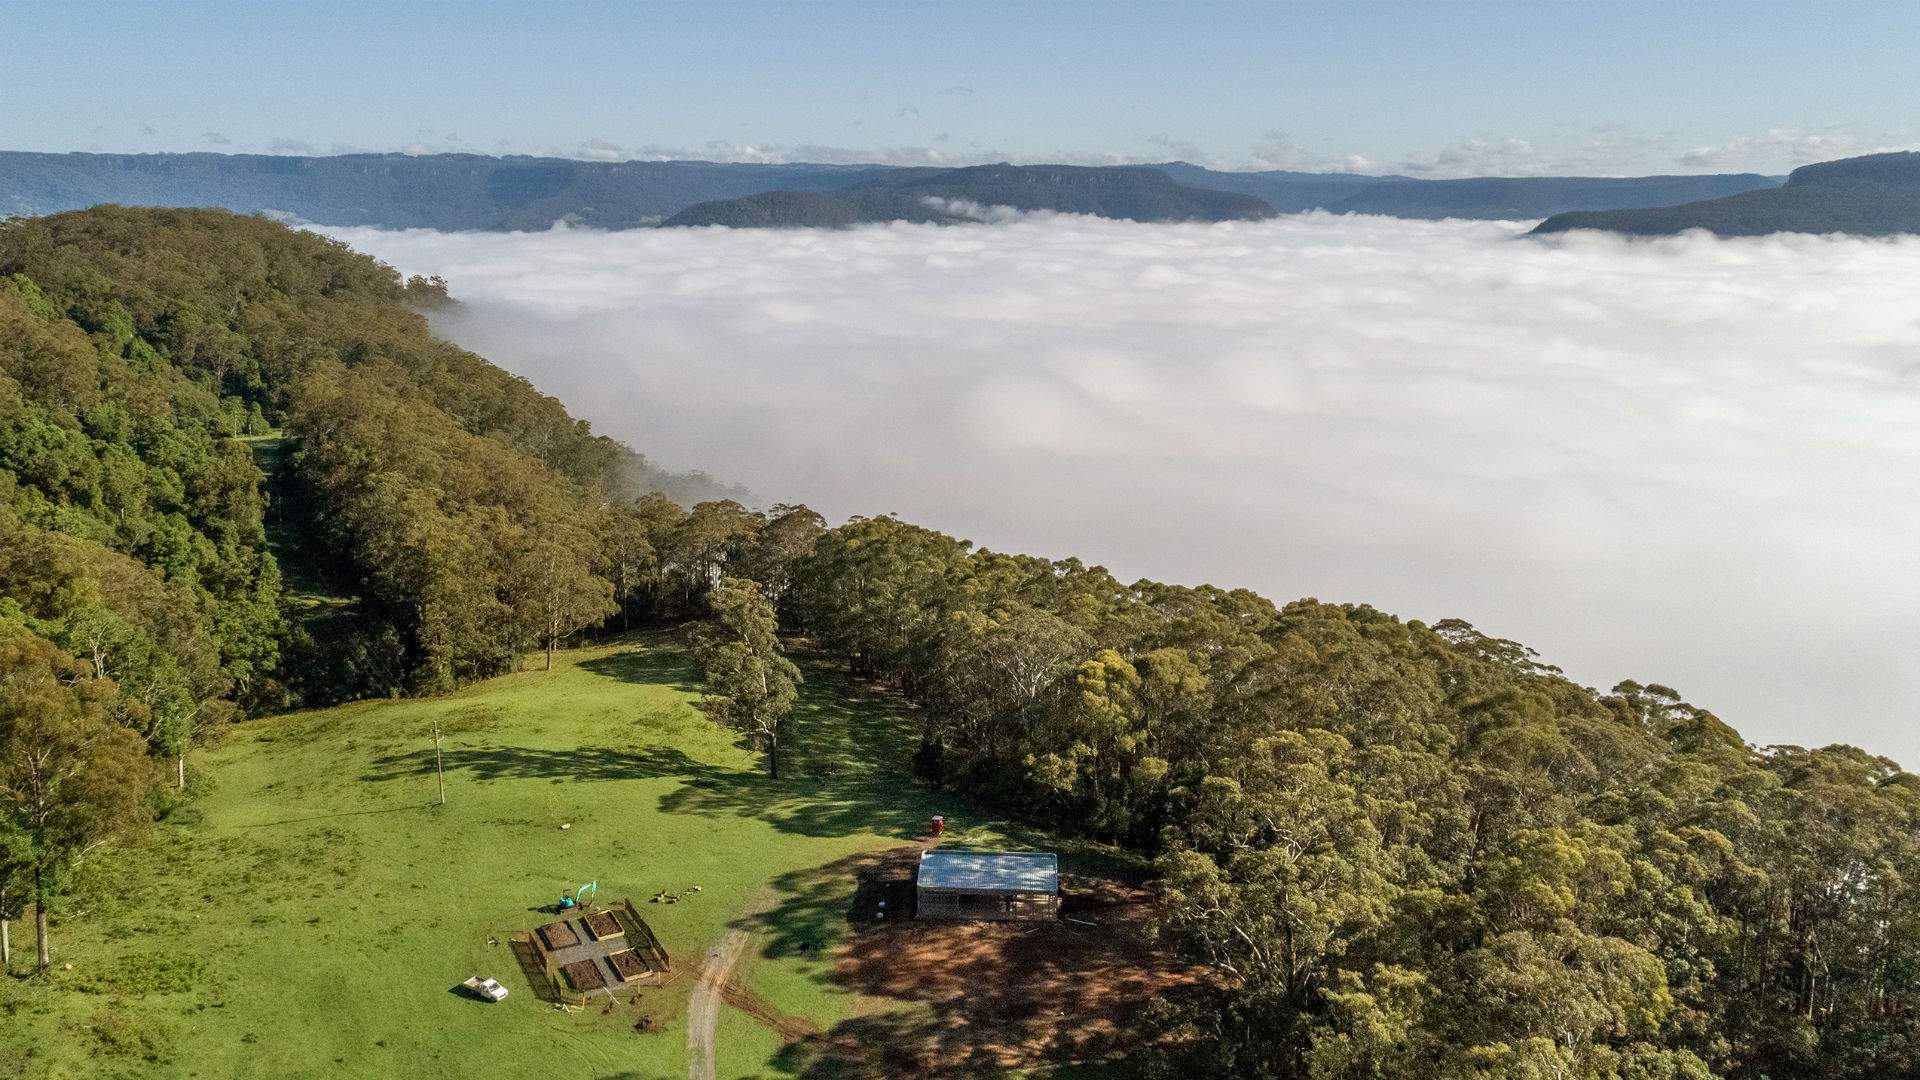 Cabn Lets You Stay in Your Own Tiny Solar-Powered House in the NSW Wilderness